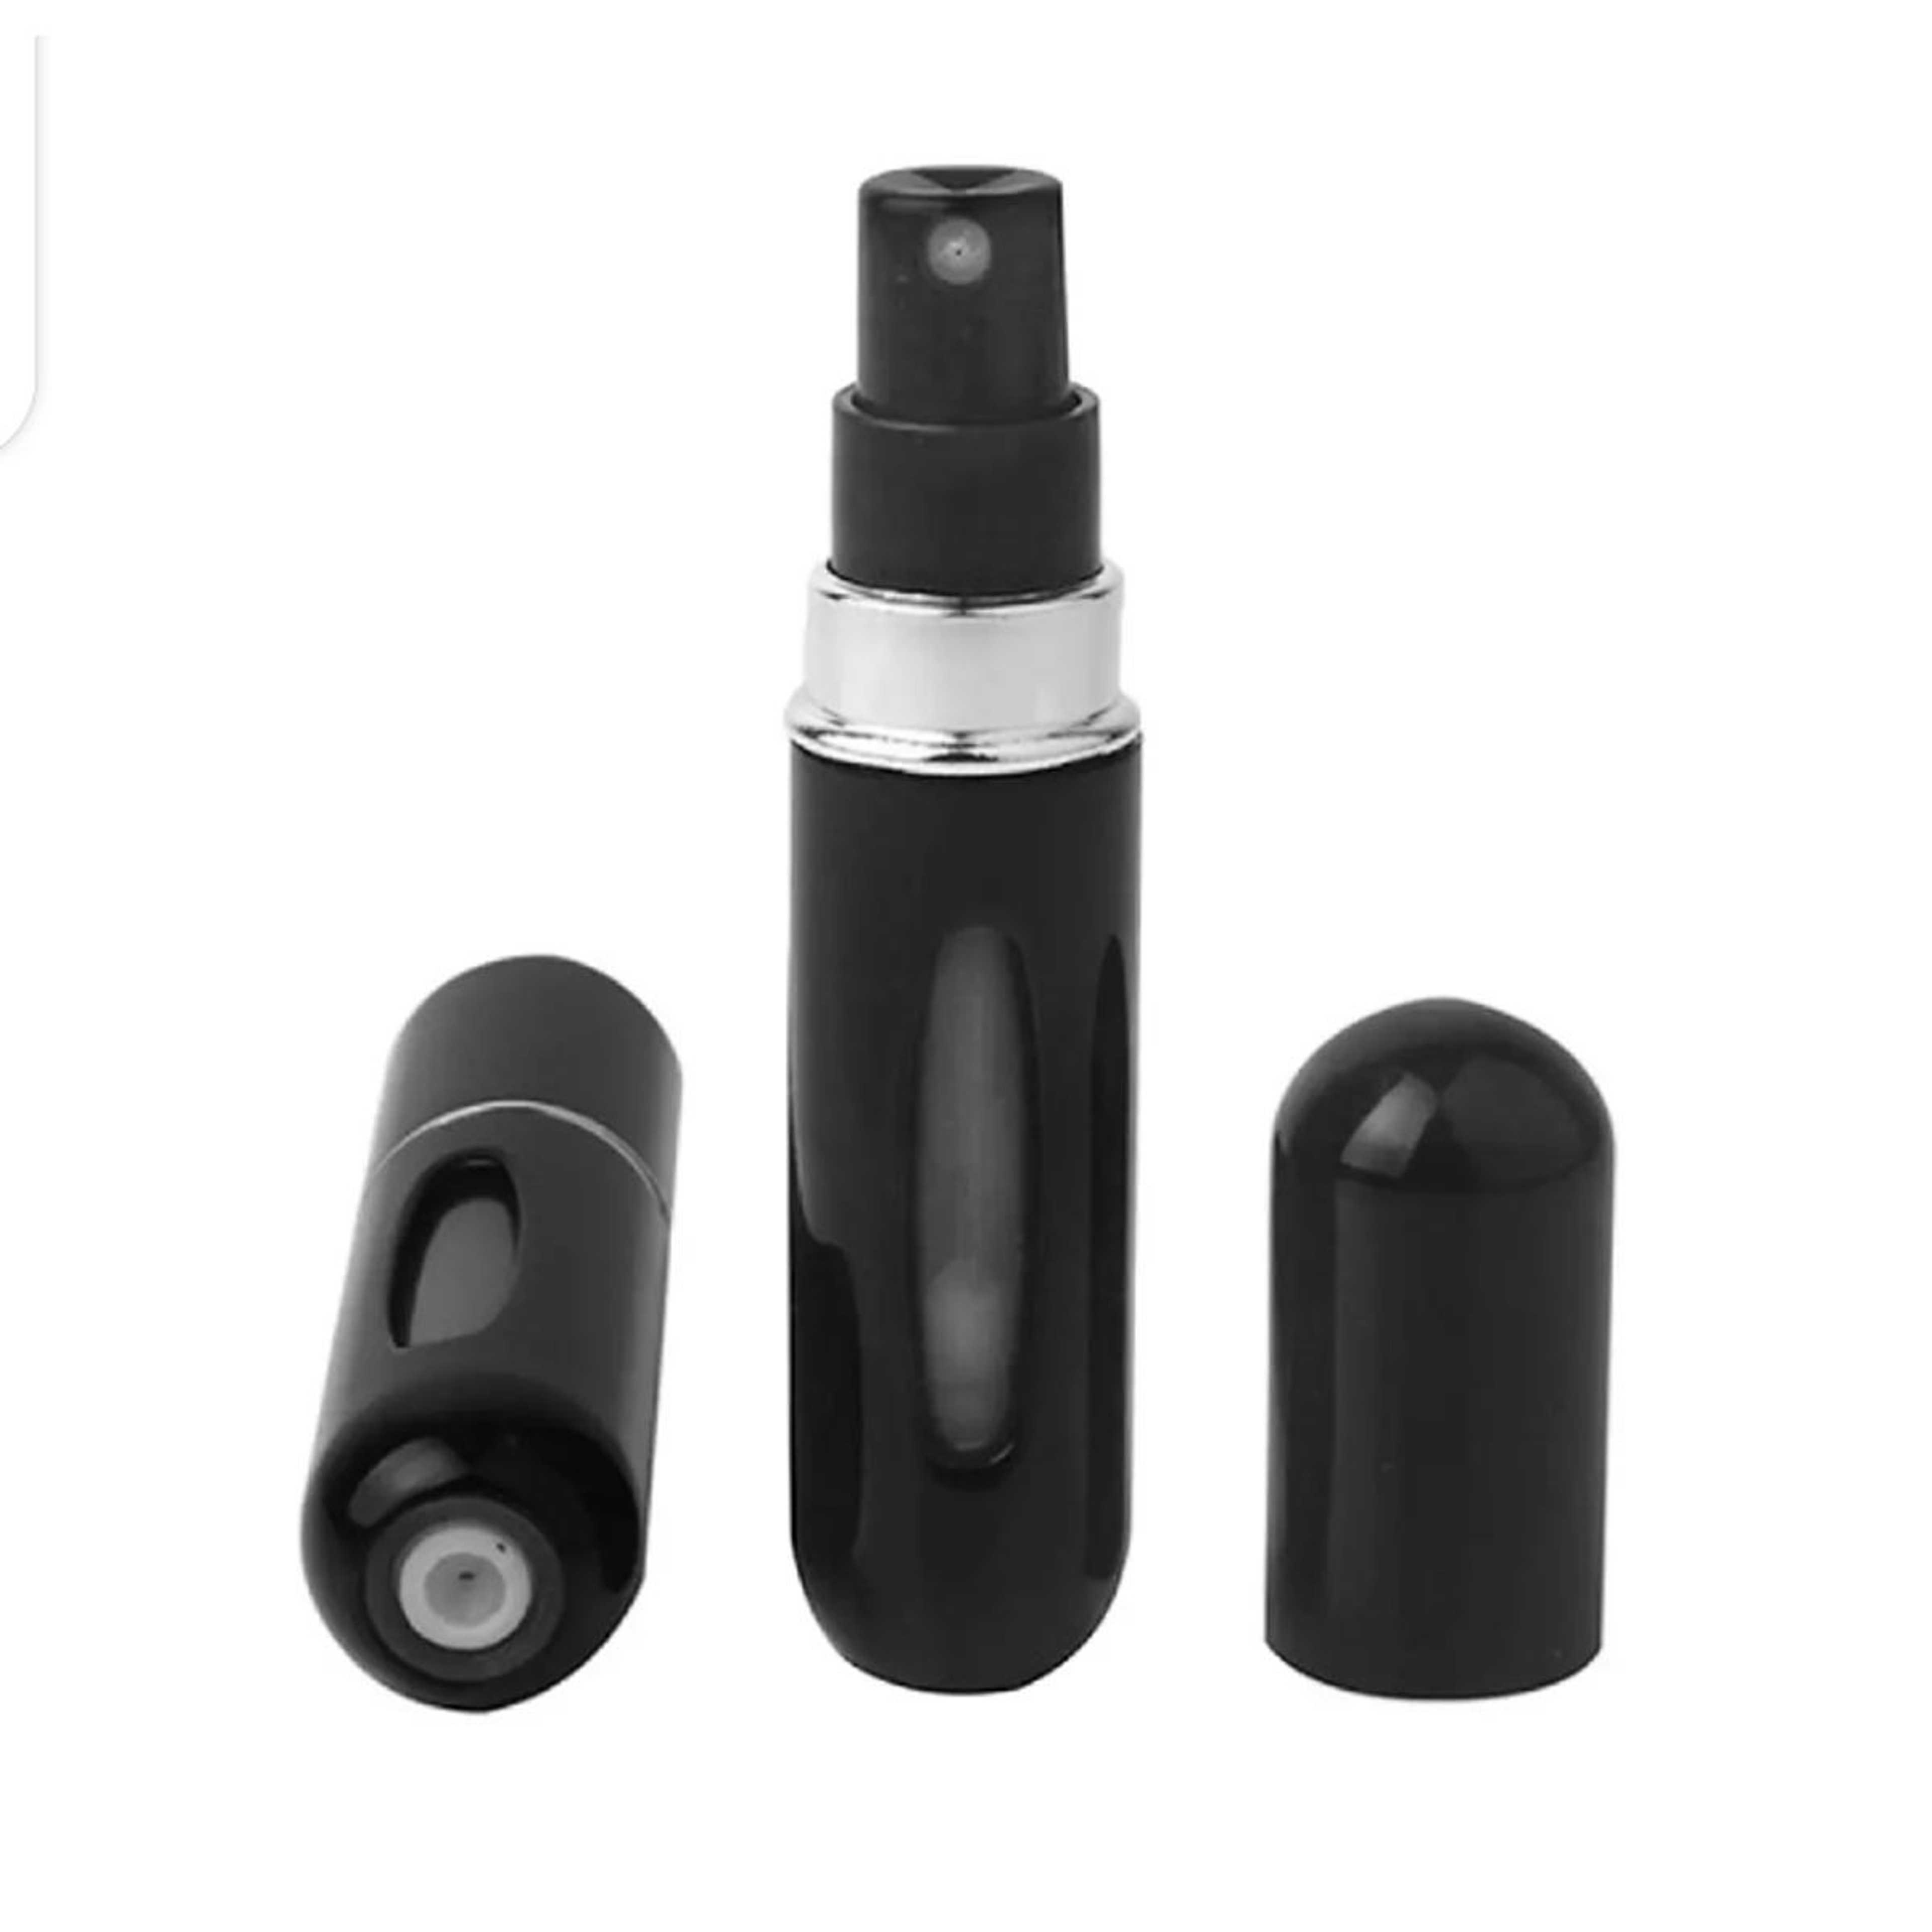 High quality Portable mini perfume refill travel size bottles with spray, cent pump/ refillable perfume bottle combo with mini hair straightener, Flawless Facial Hair Remover rechargeable, Leaf shape soap holder, heel crack protector socks